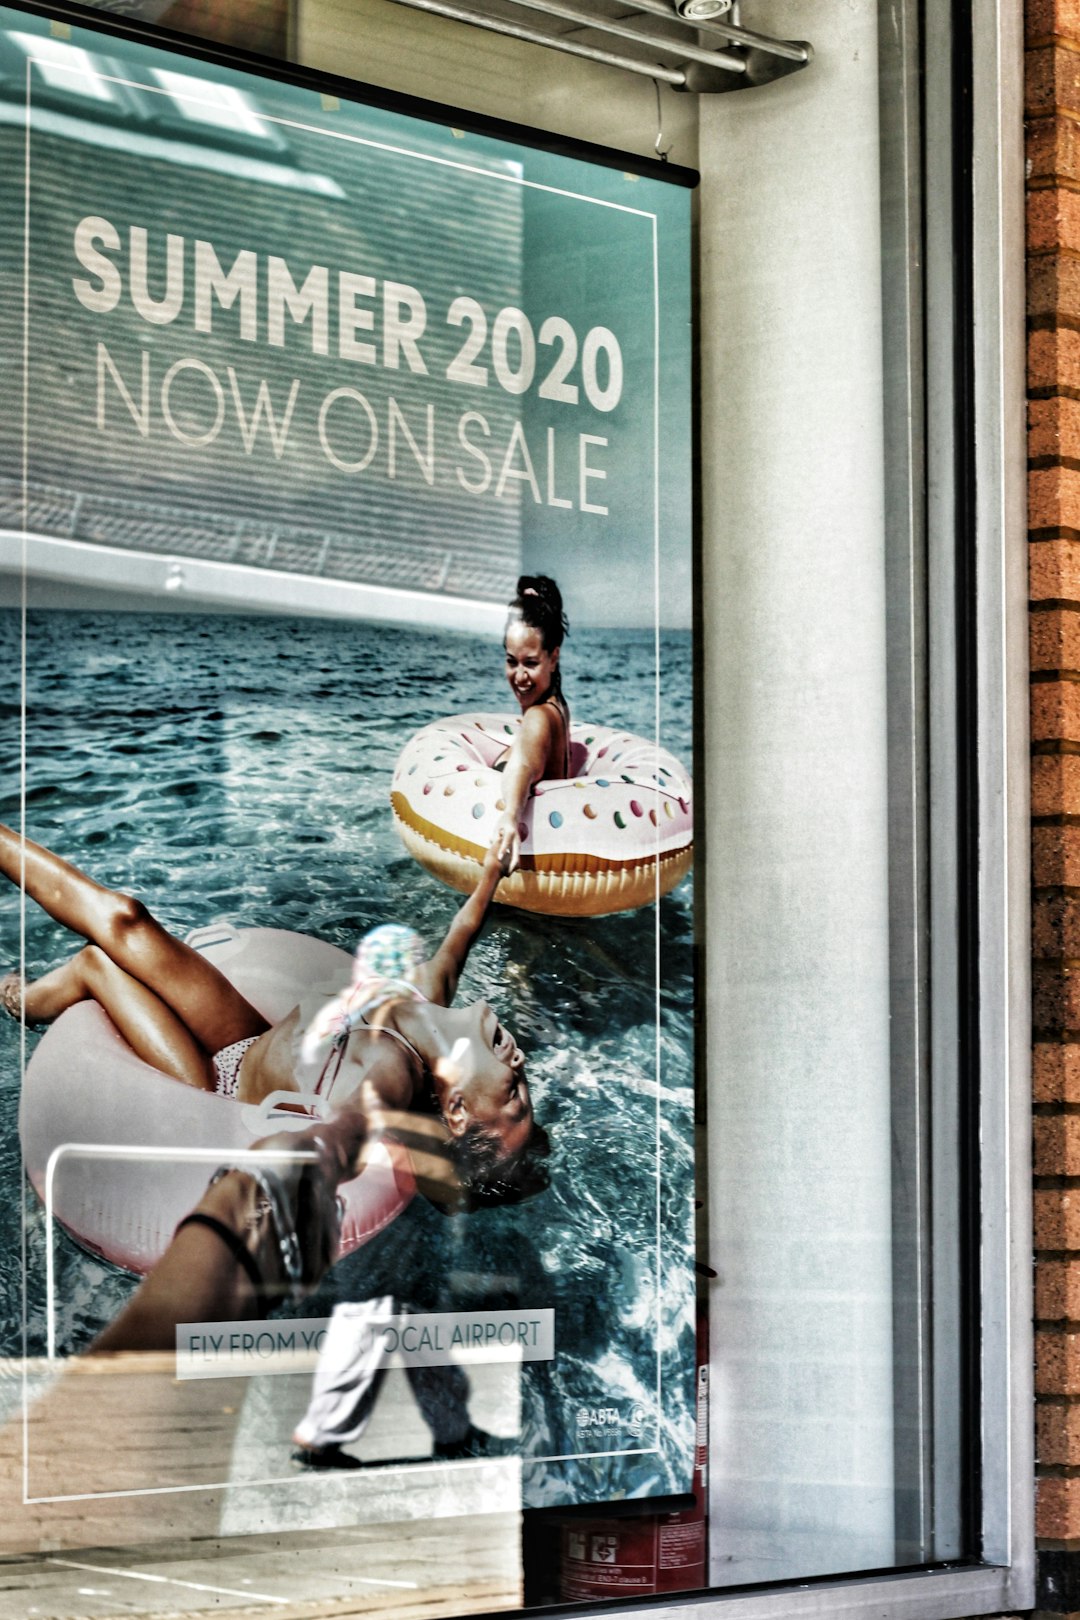 Summer 2020 Now on Sale signage